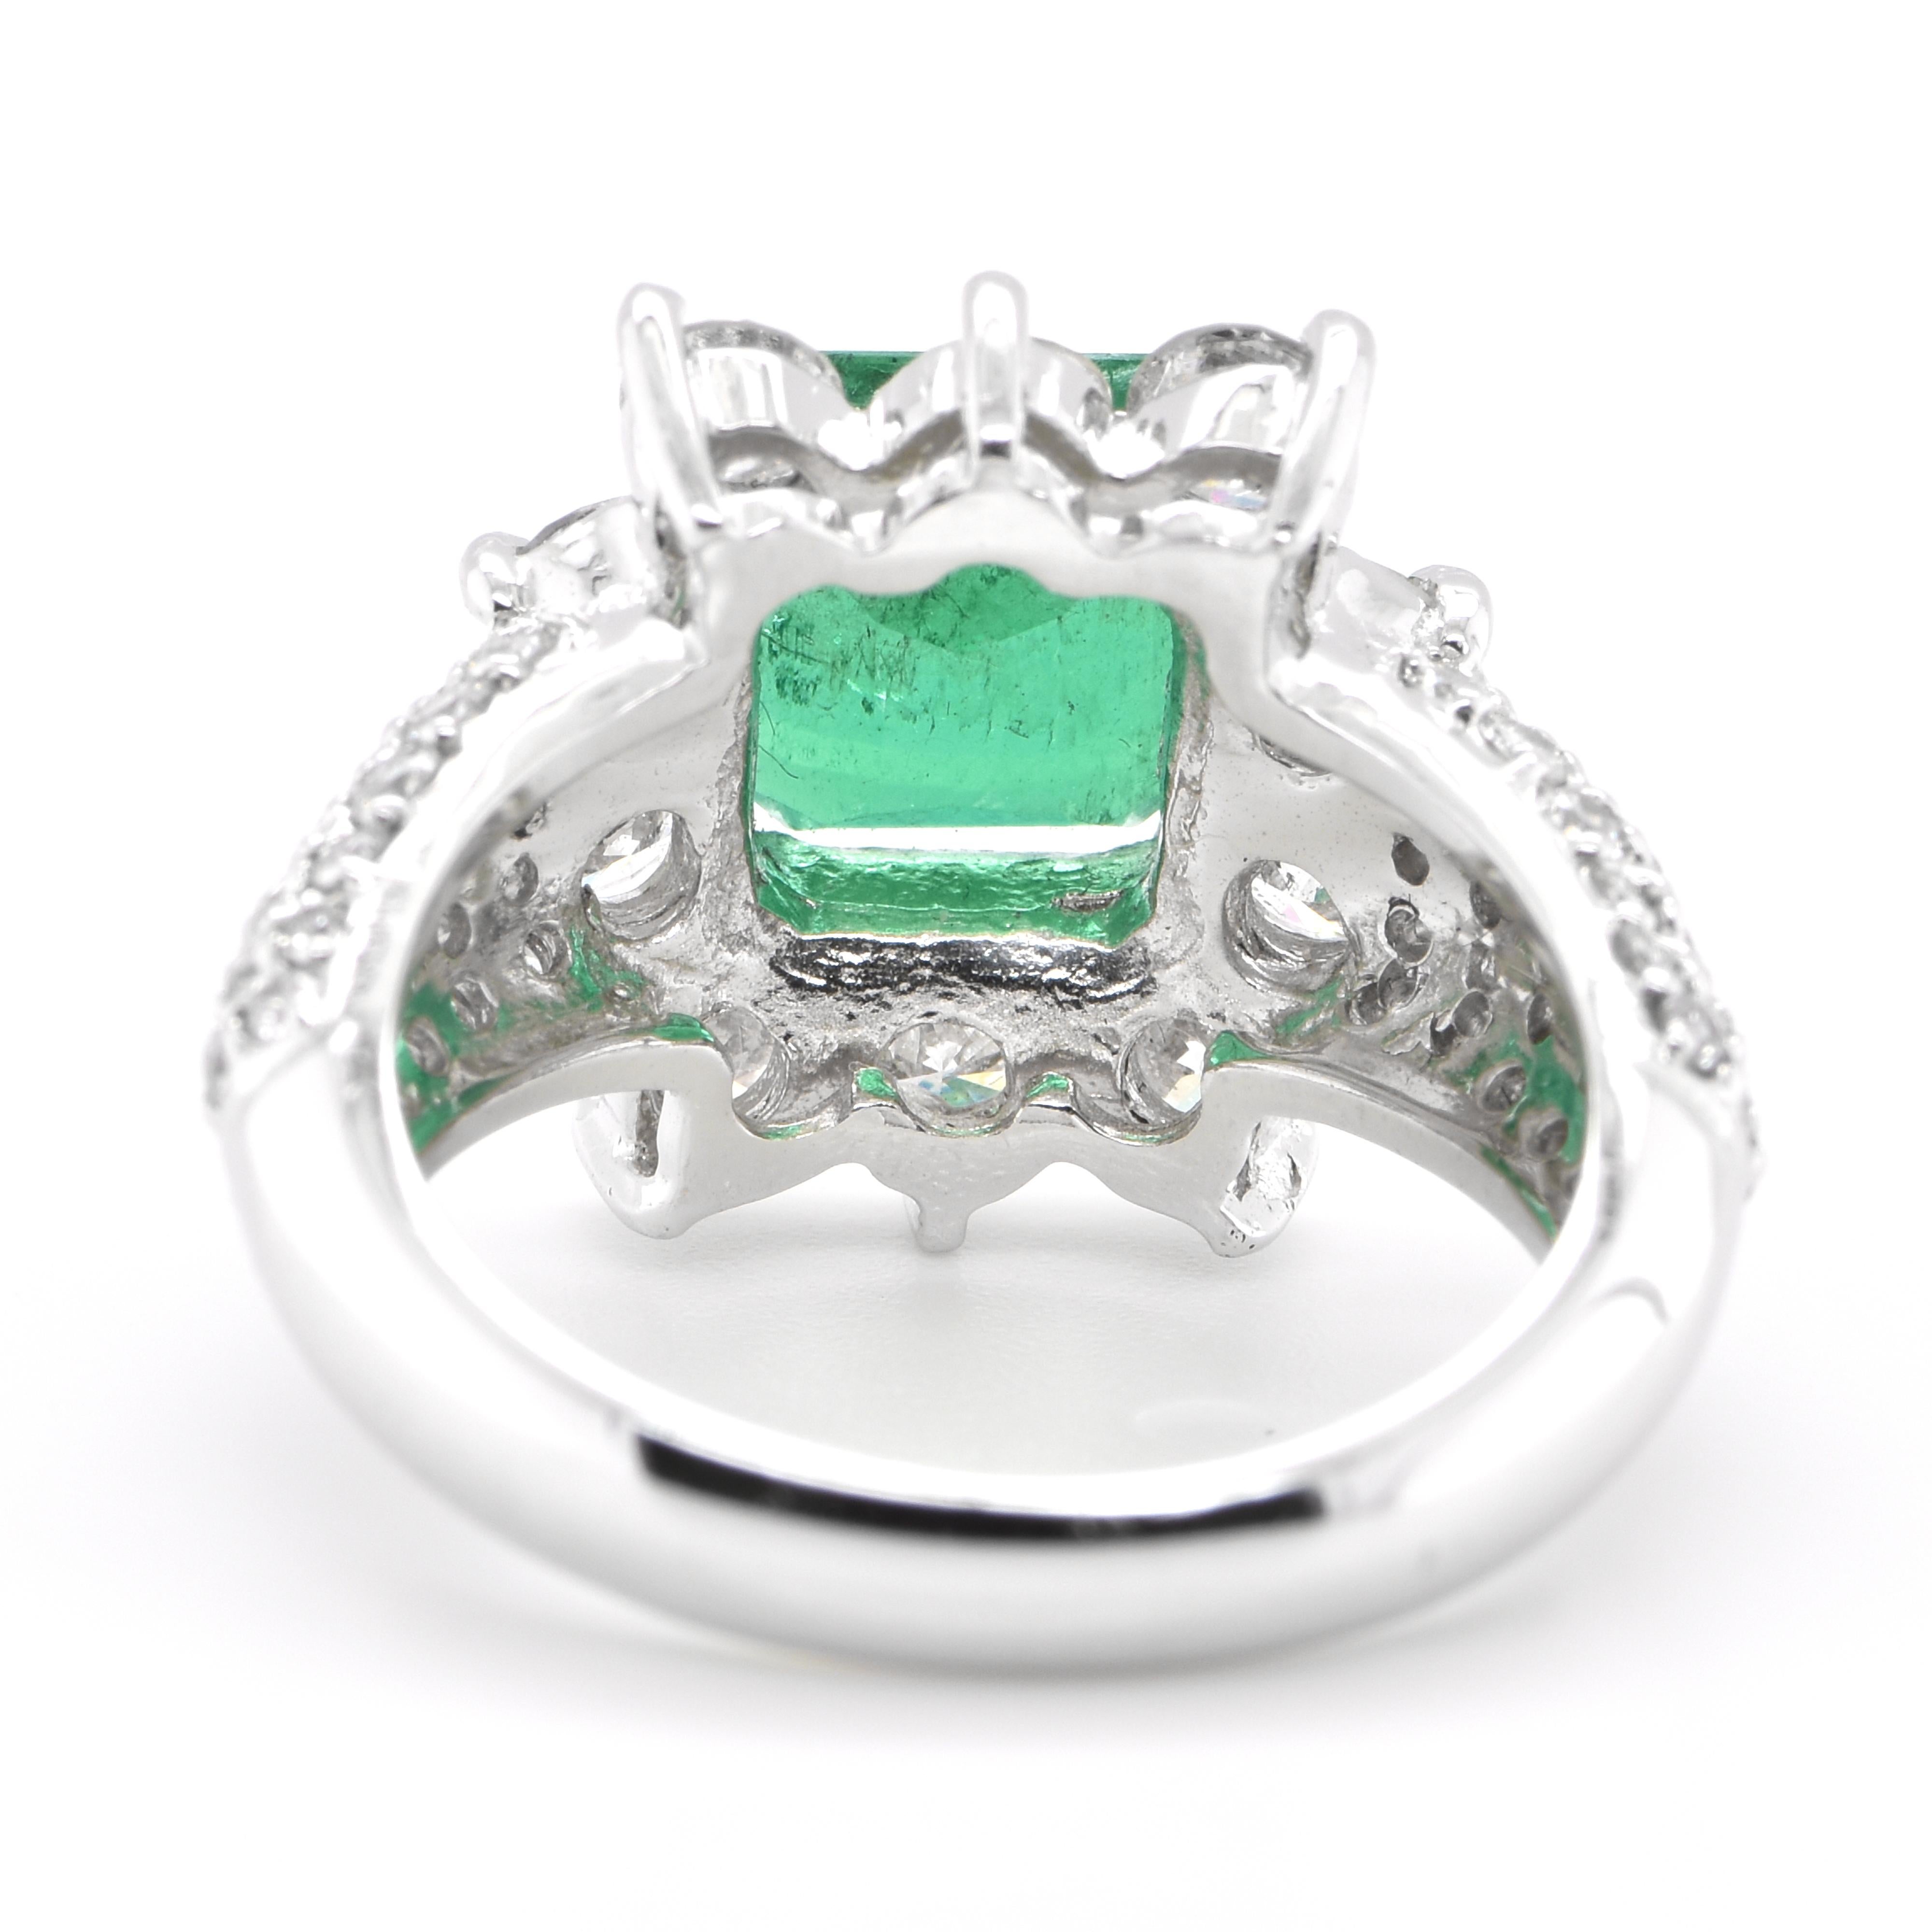 Women's 2.63 Carat Natural Emerald and Diamond Cocktail Ring Set in Platinum For Sale